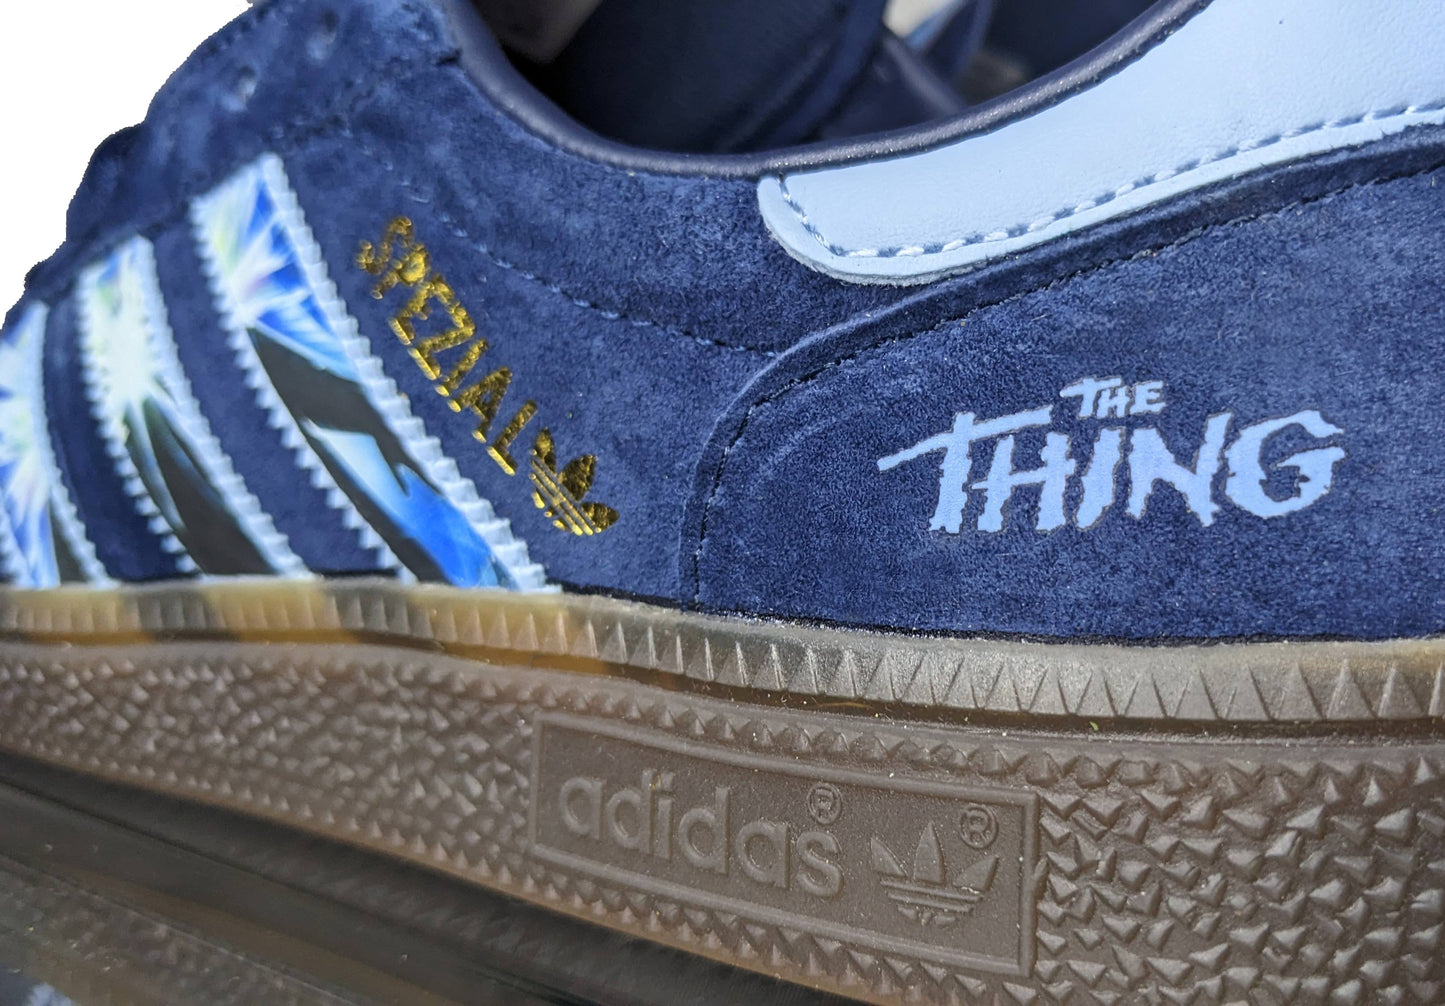 Limited edition John Carpenters The Thing movie inspired navy blue /sky blue Adidas custom Handball Spezial trainers / sneakers